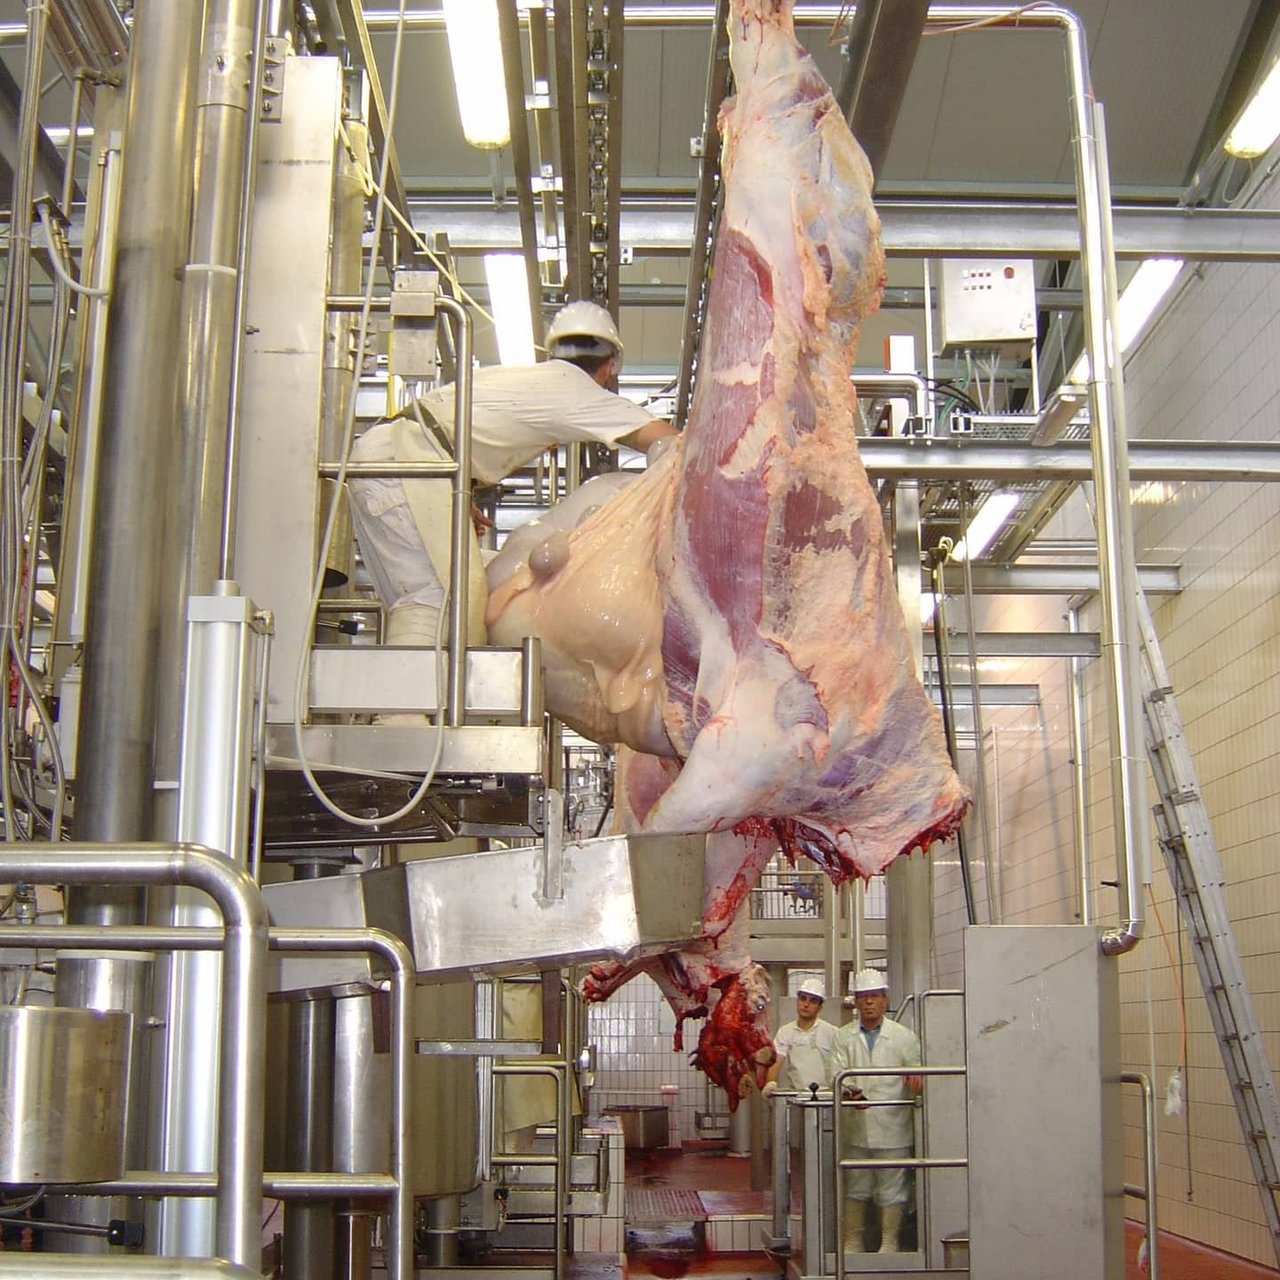 Sheep slaughter, sheep abattoir and goat slaughter plants